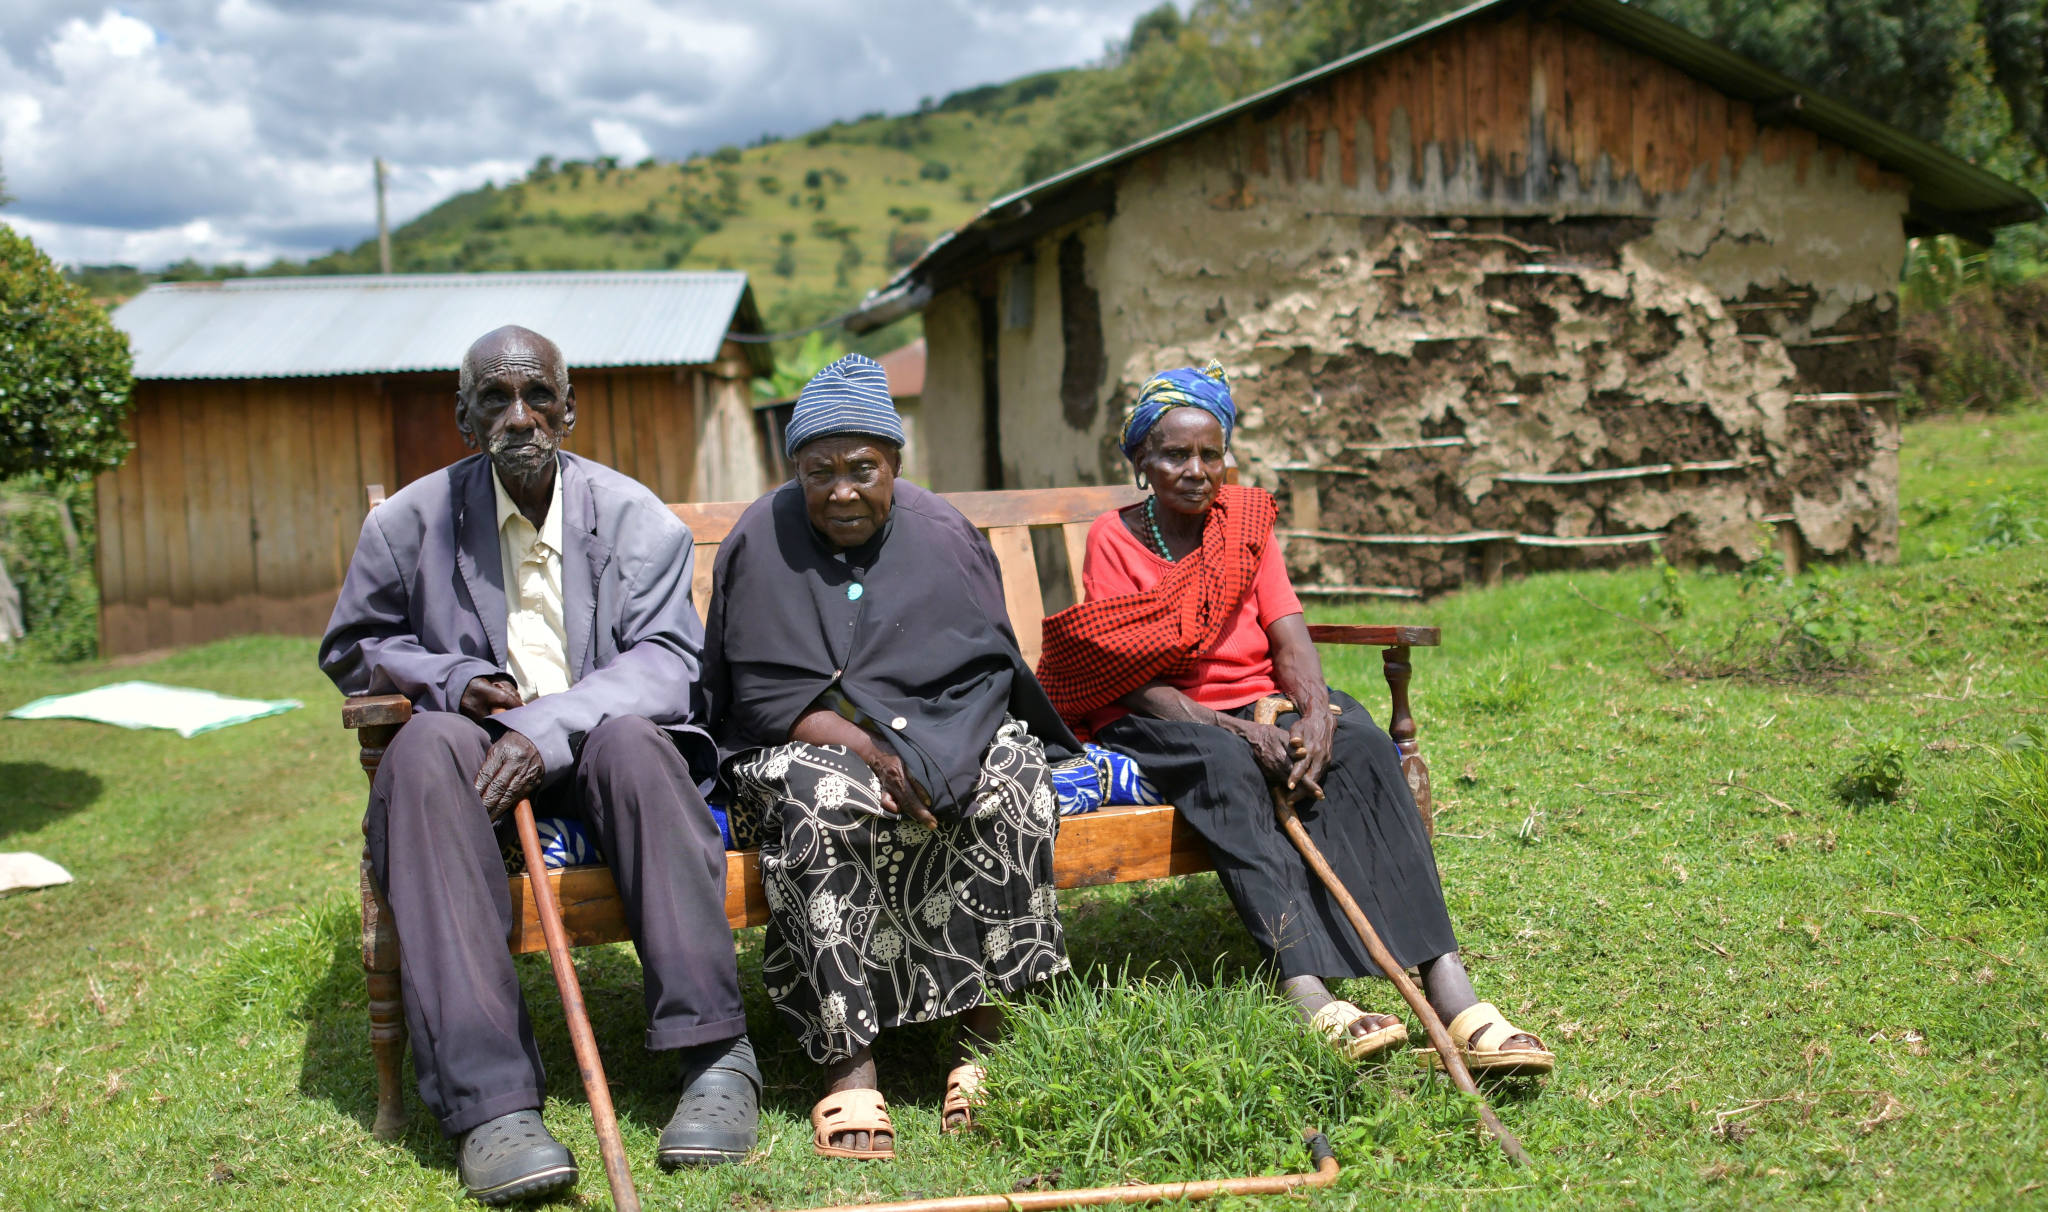 Kibore Cheruiyot Ngasura, left, was evicted from Kericho in 1934 and deported to an island on Lake Victoria. (Photo: Tony Karumba / AFP via Getty)